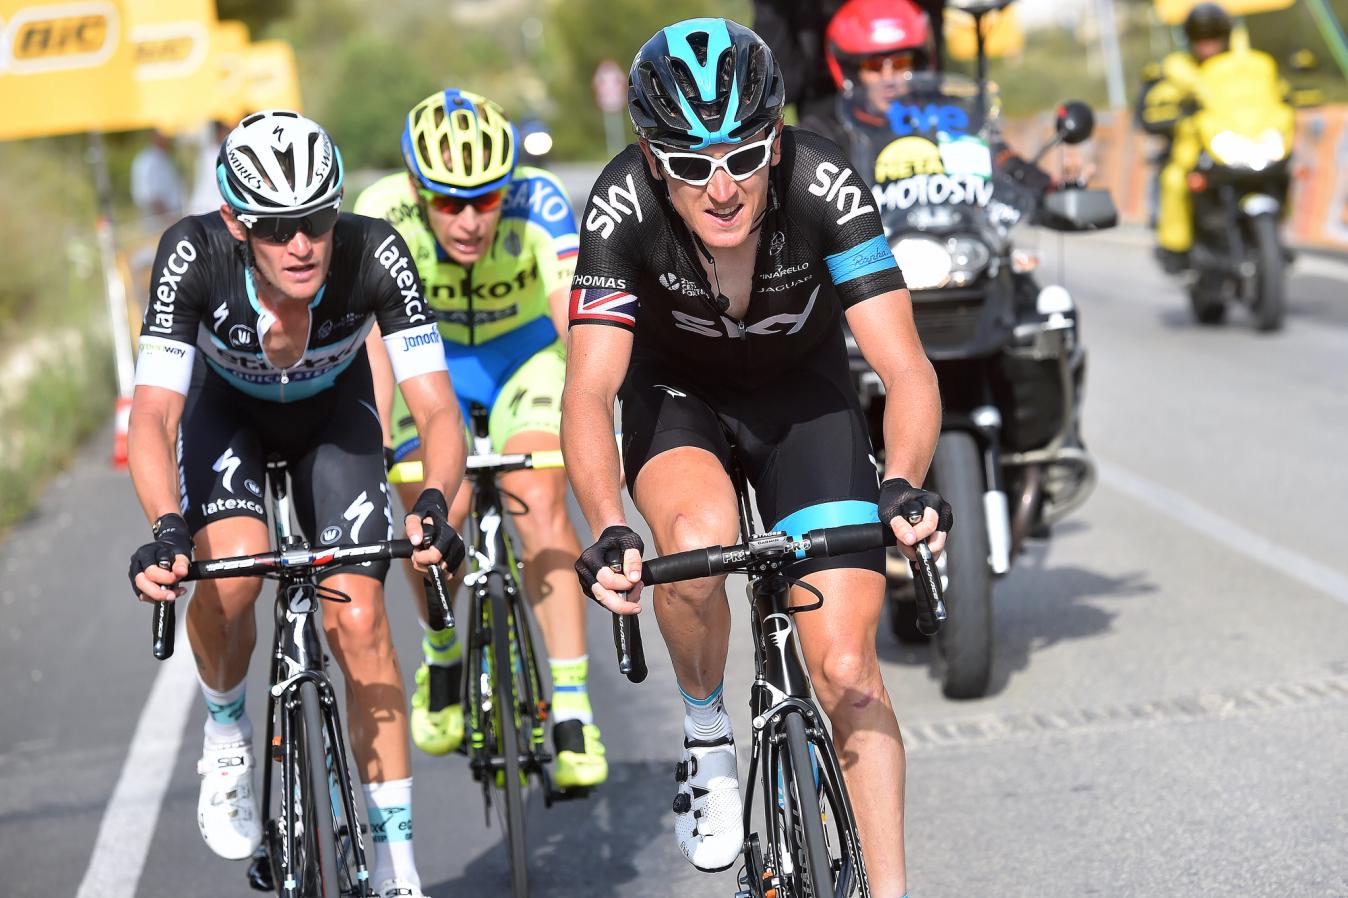 Geraint Thomas rode the 2015 Vuelta a España in support of Chris Froome, whose bid for the red jersey was curtailed by a crash